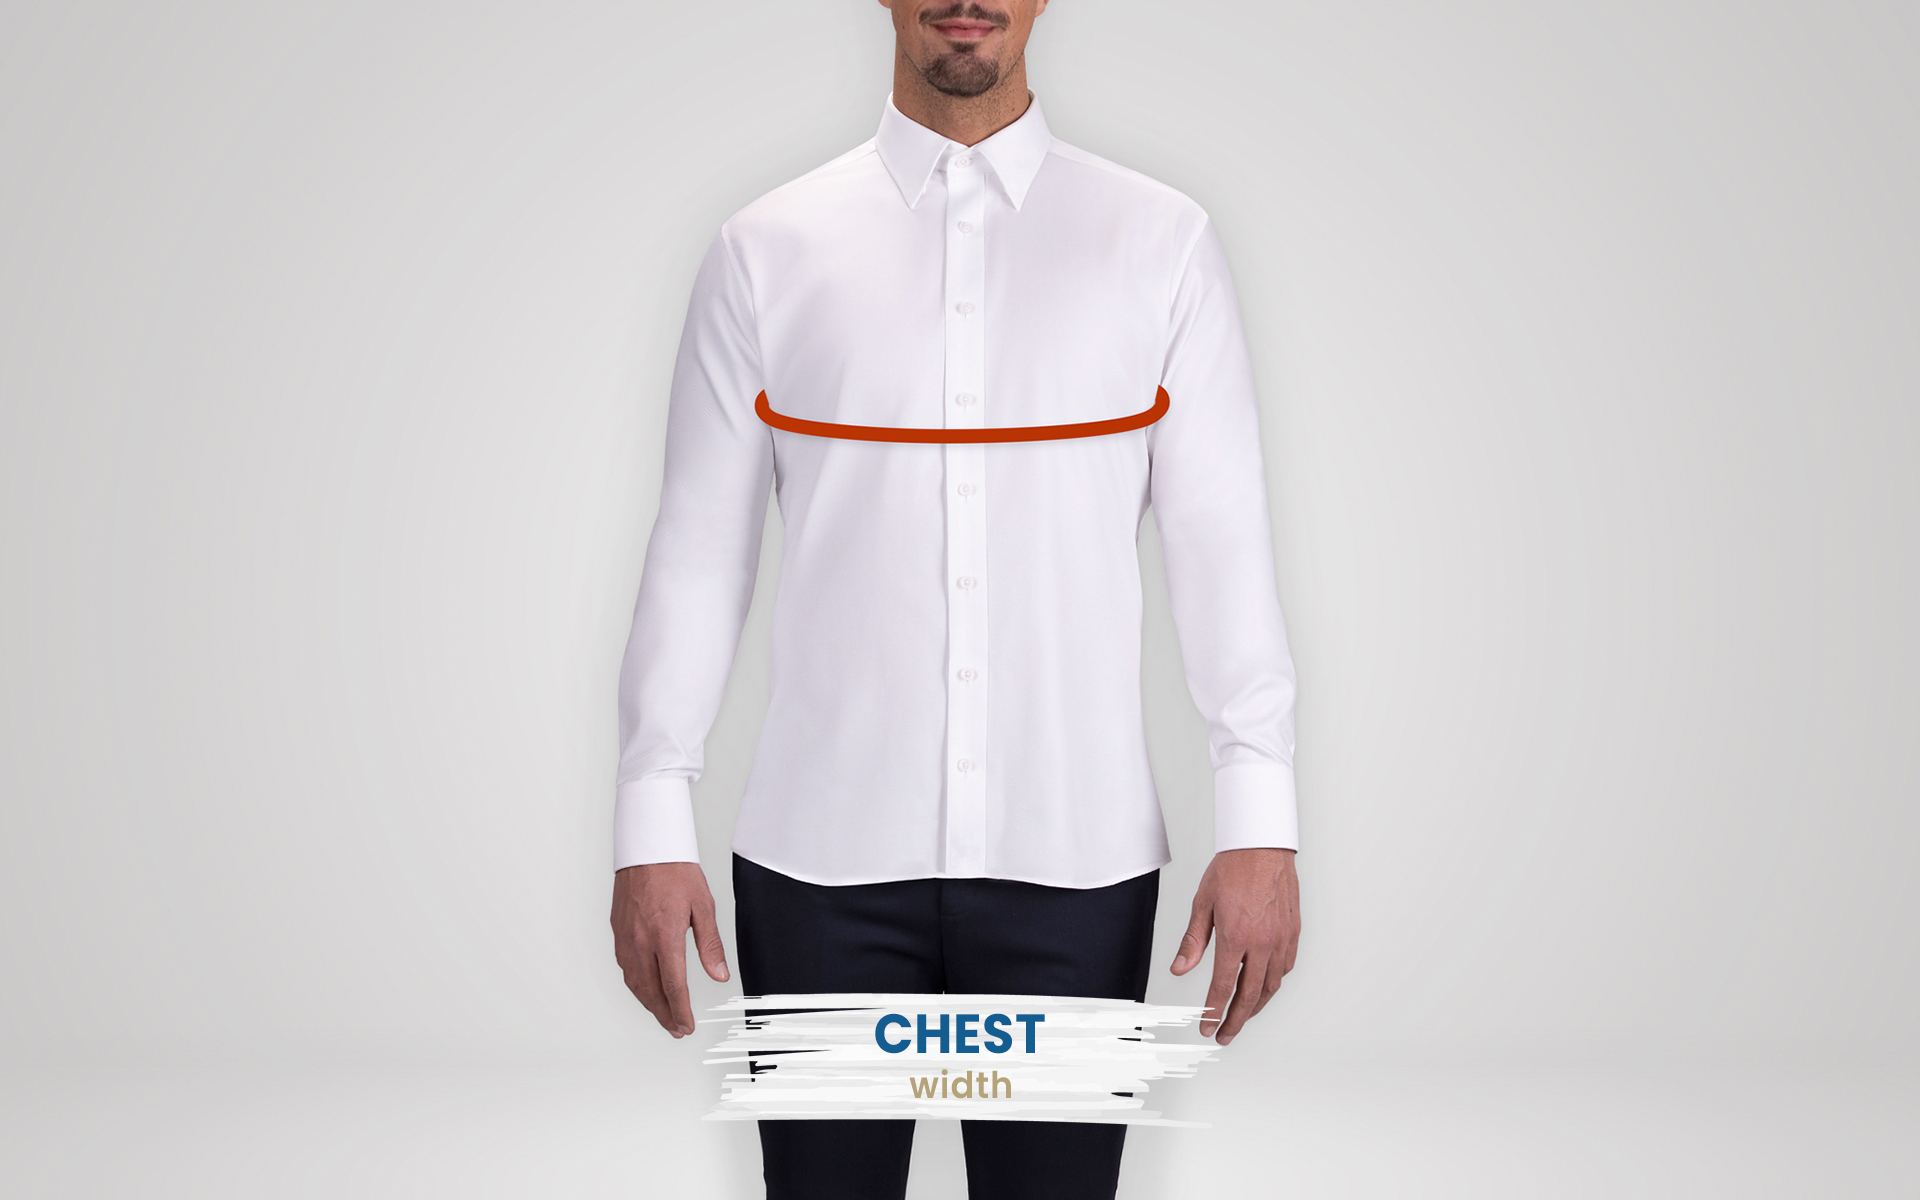 how to measure and fit the tuxedo shirt's chest width